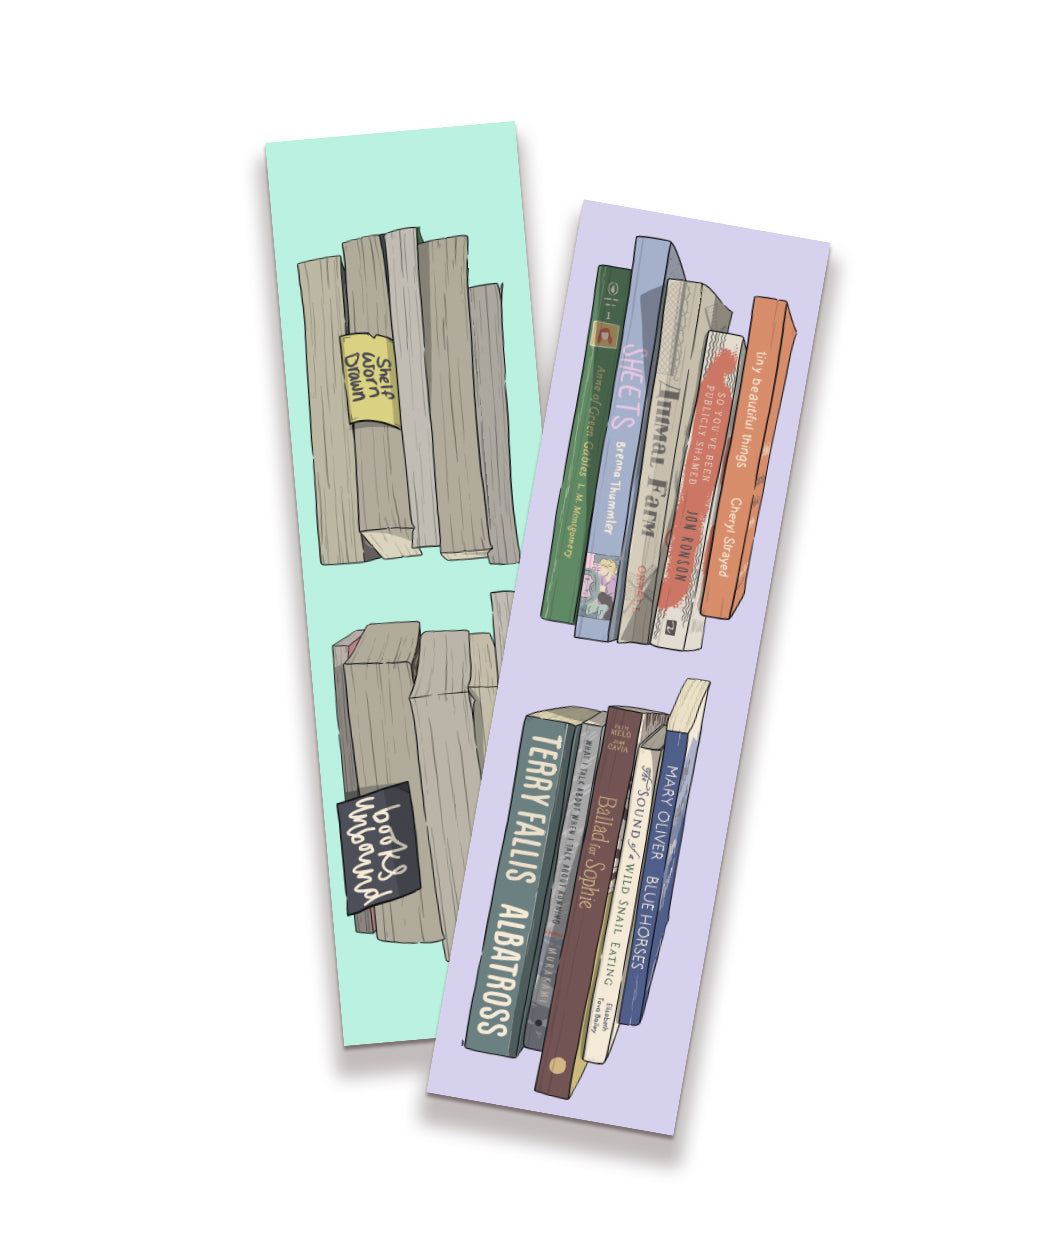 A set of 2 bookmarks with an illustration of stacks of books, with the spines showing the titles of different popular books.